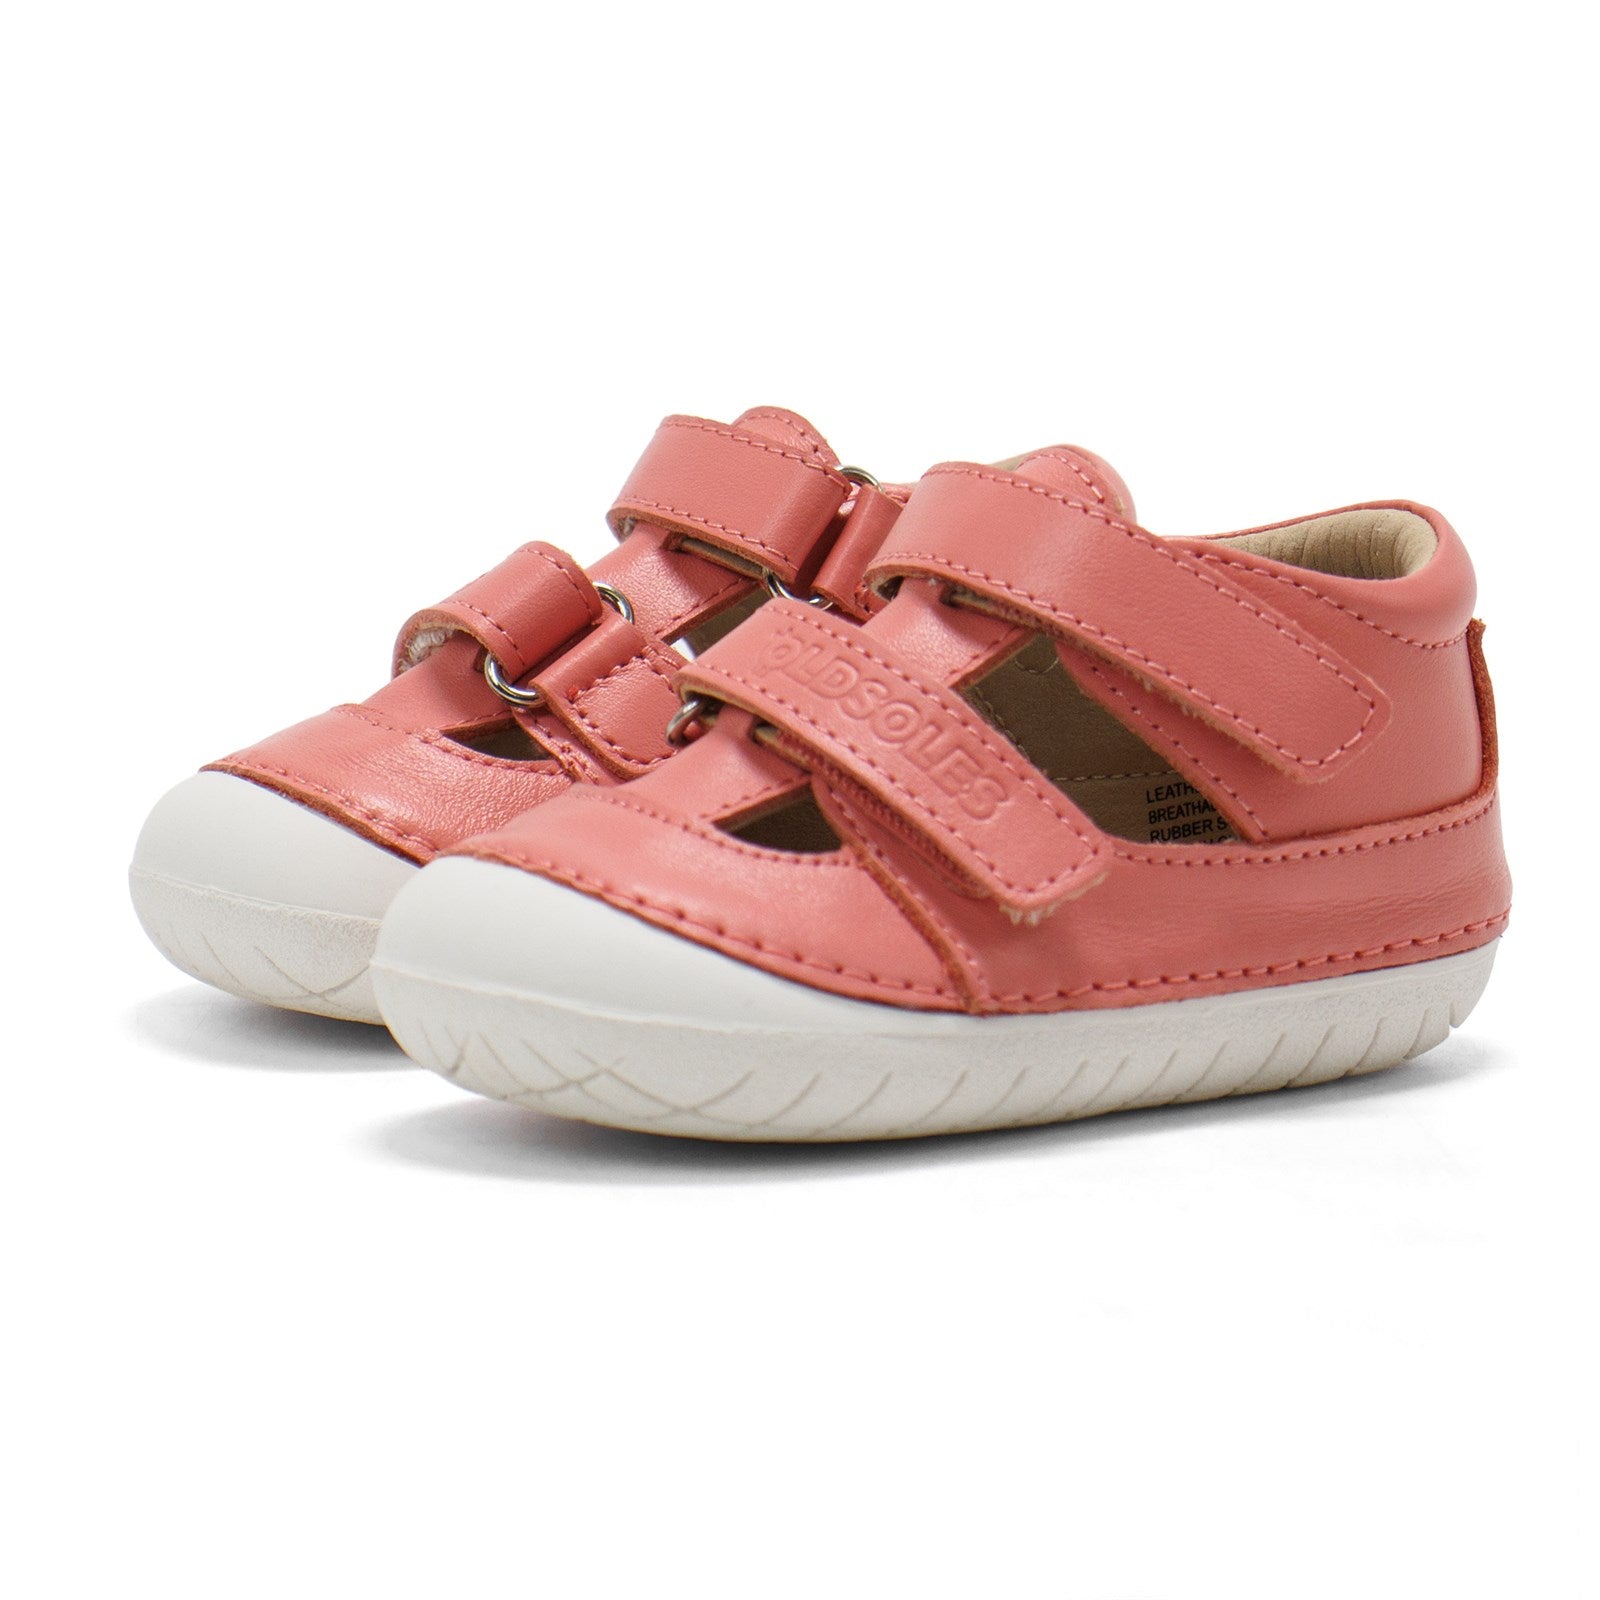 Old Soles Toddler Tech Pave Double Hook And Loop Closure Sneakers